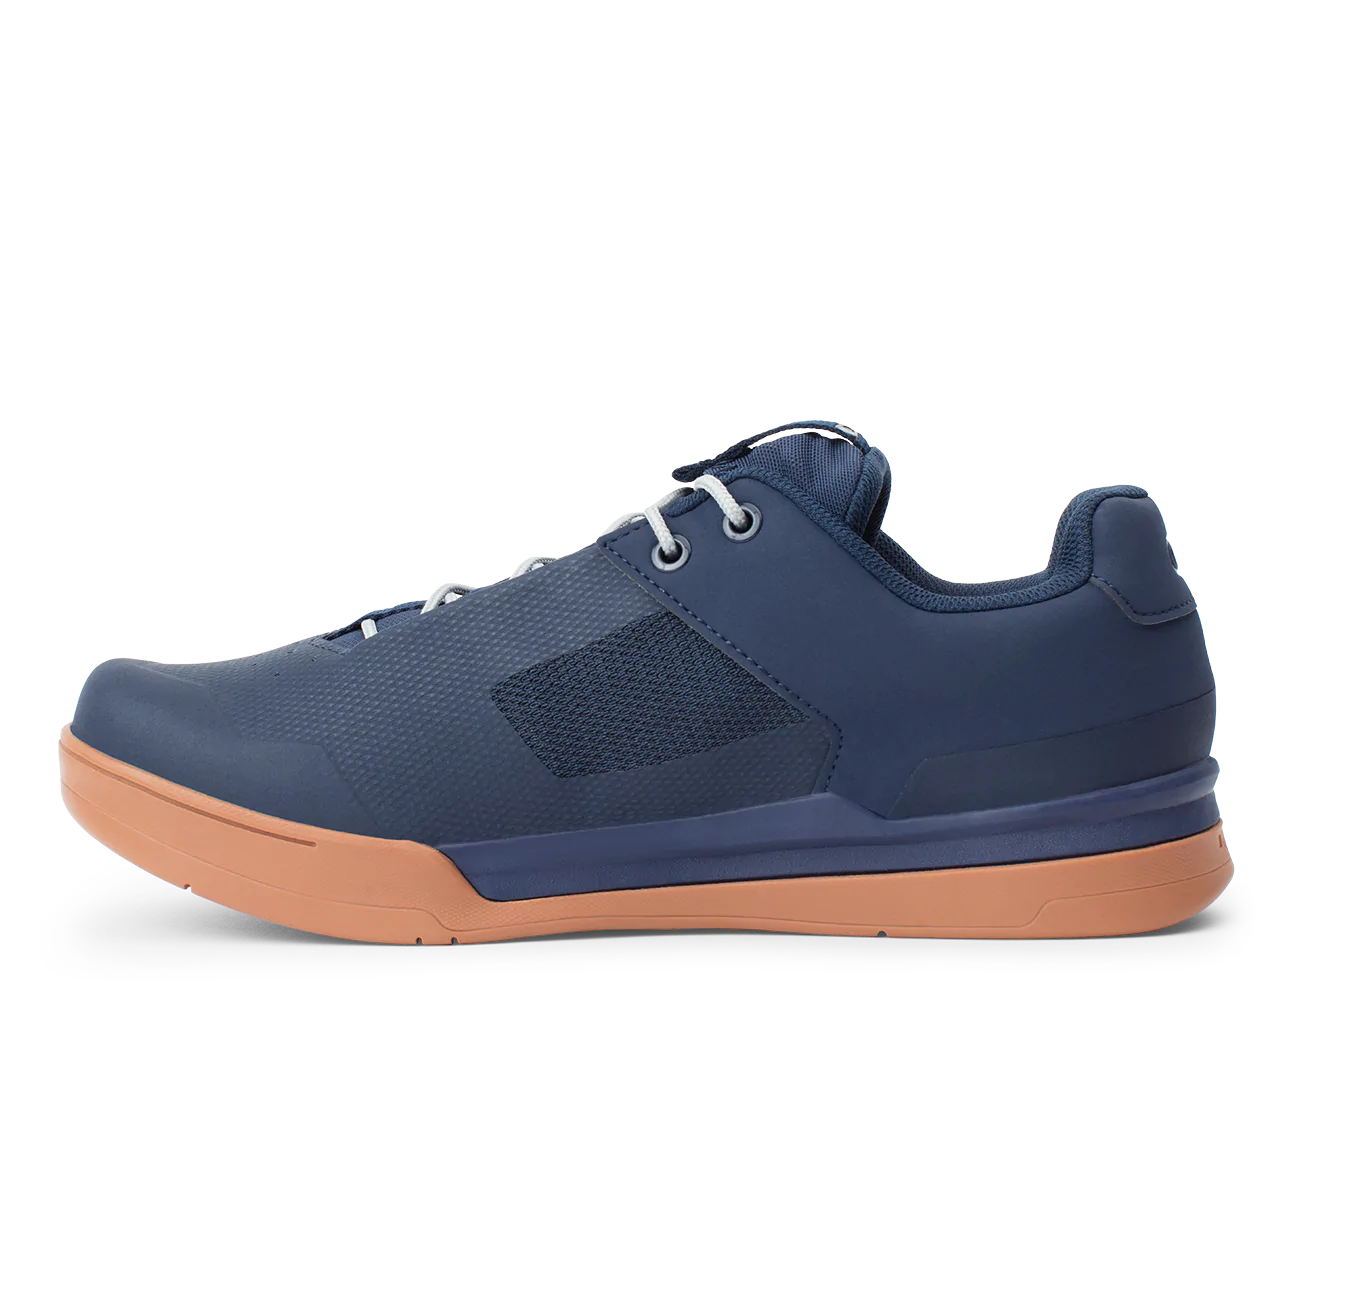 Crank Brothers Mallet Lace MTB Shoe - Navy-Silver-Gum